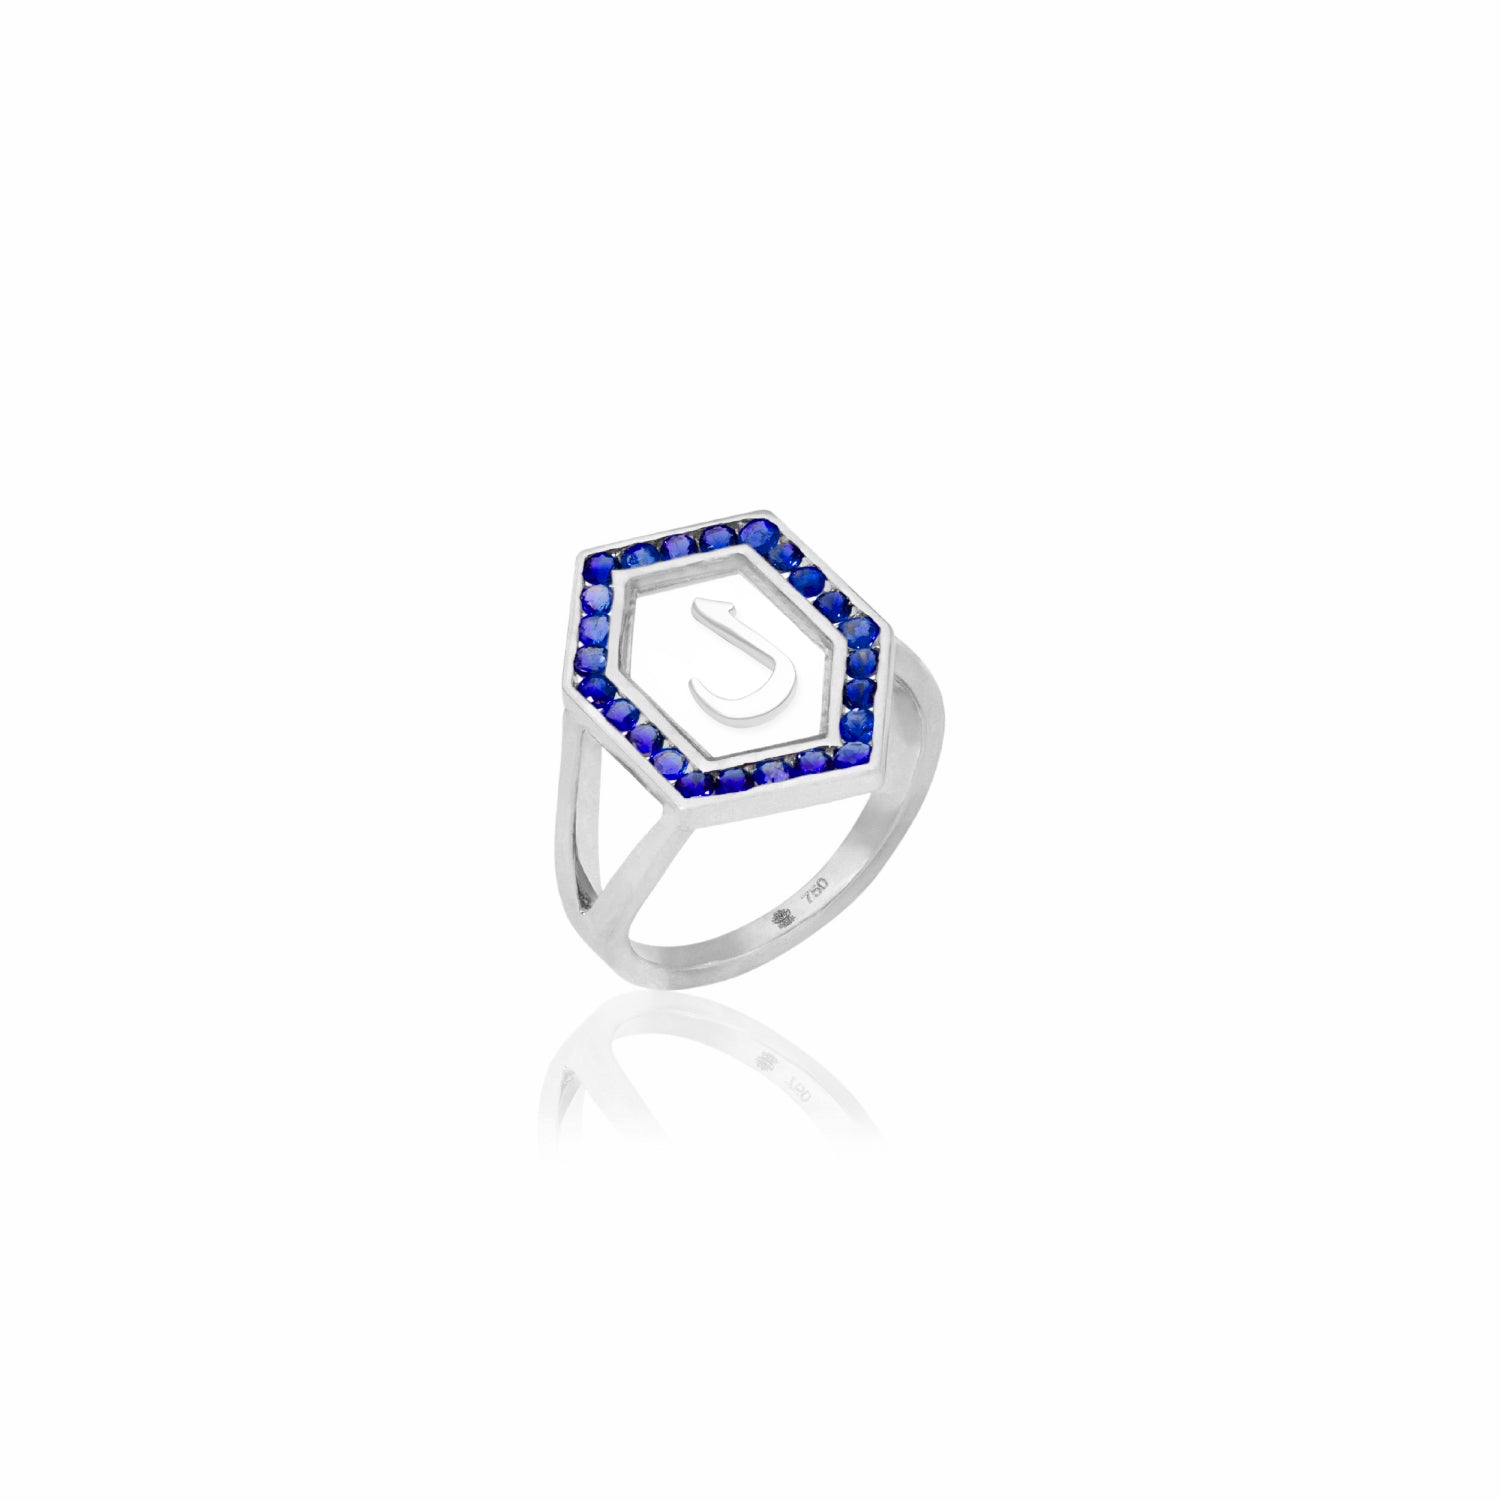 Qamoos 1.0 Letter ل Sapphire Ring in White Gold